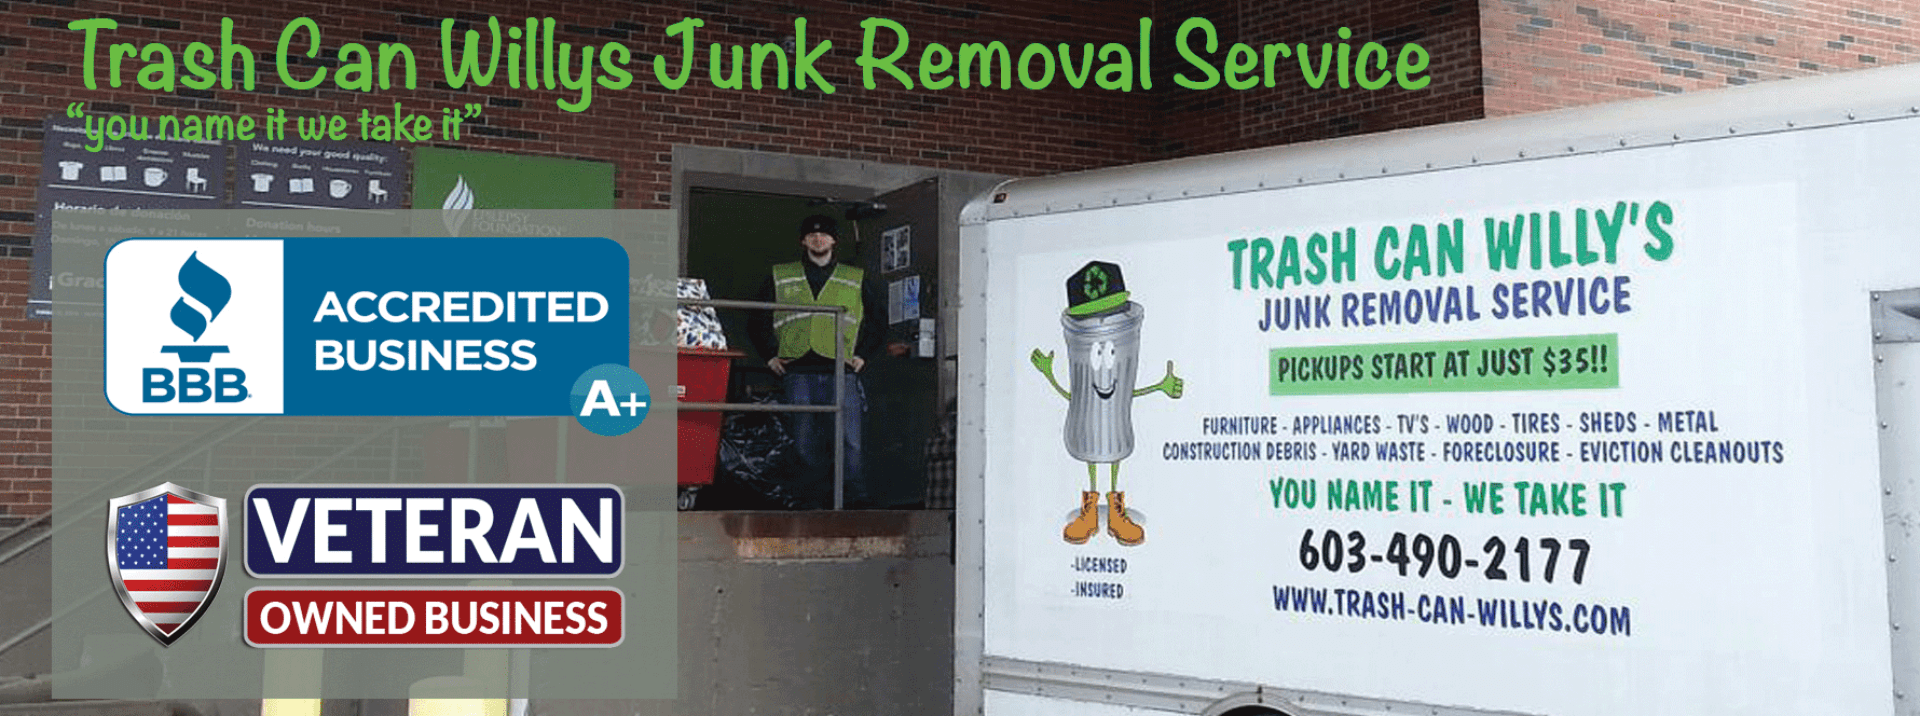 debris hauling junk removal whole house cleanout services ma nh